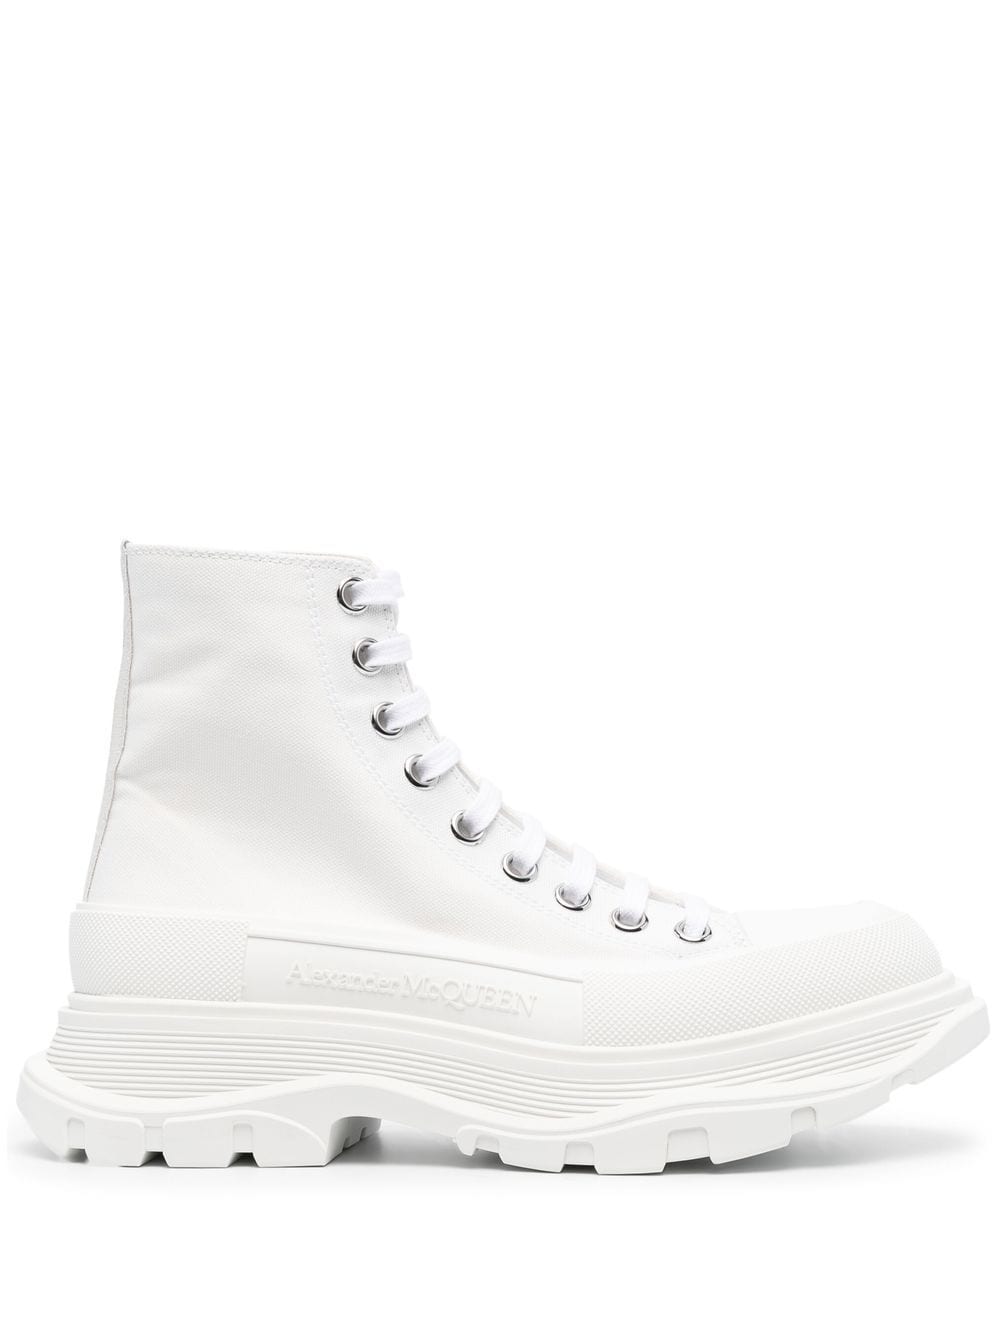 Image 1 of Alexander McQueen chunky-sole sneakers